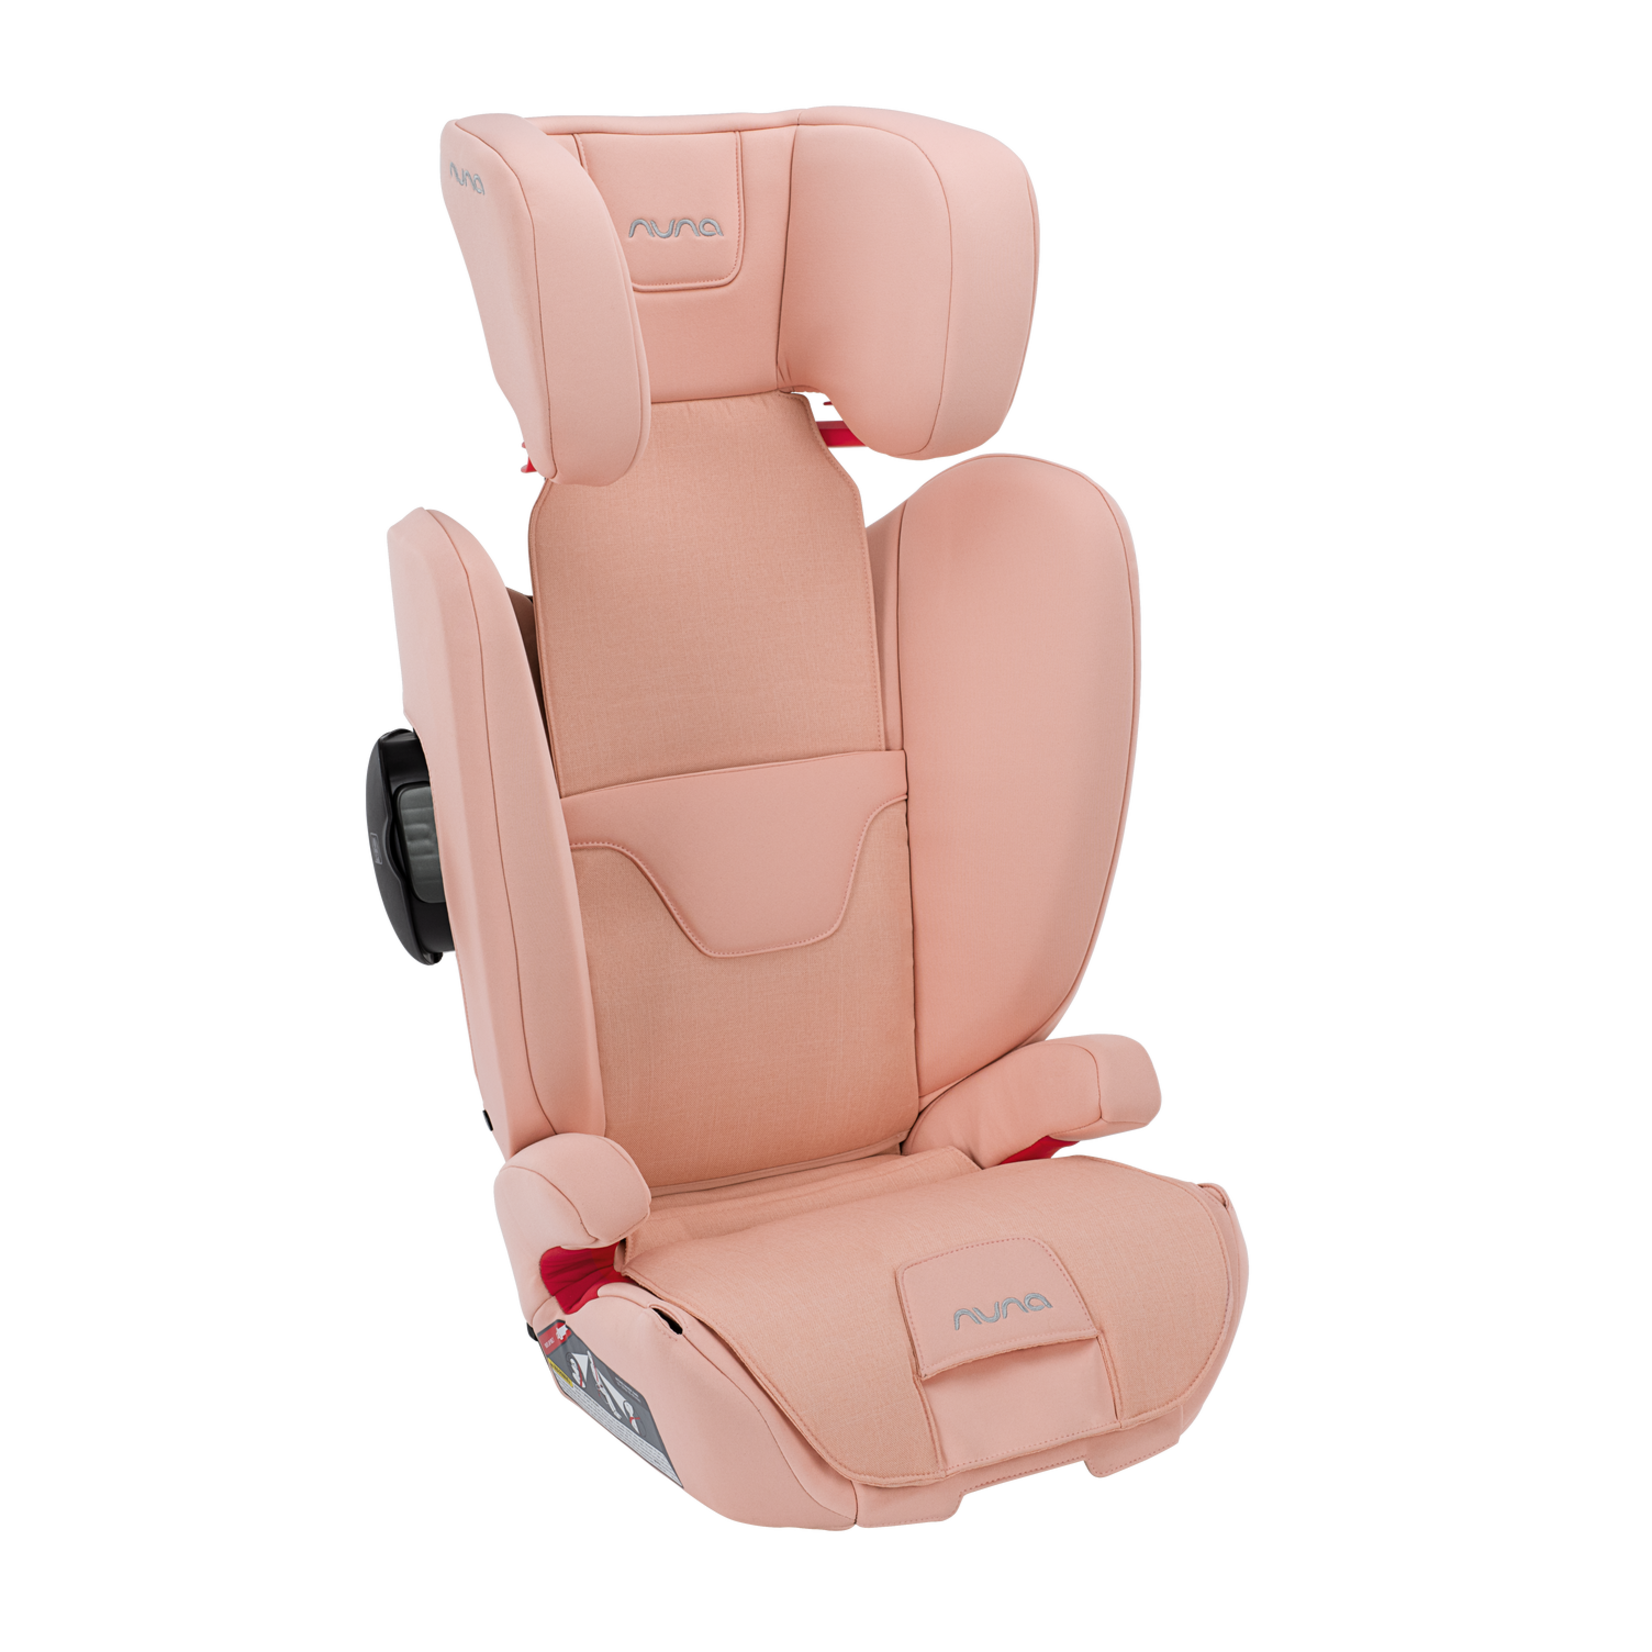 Nuna AACE Booster Seat - Coral